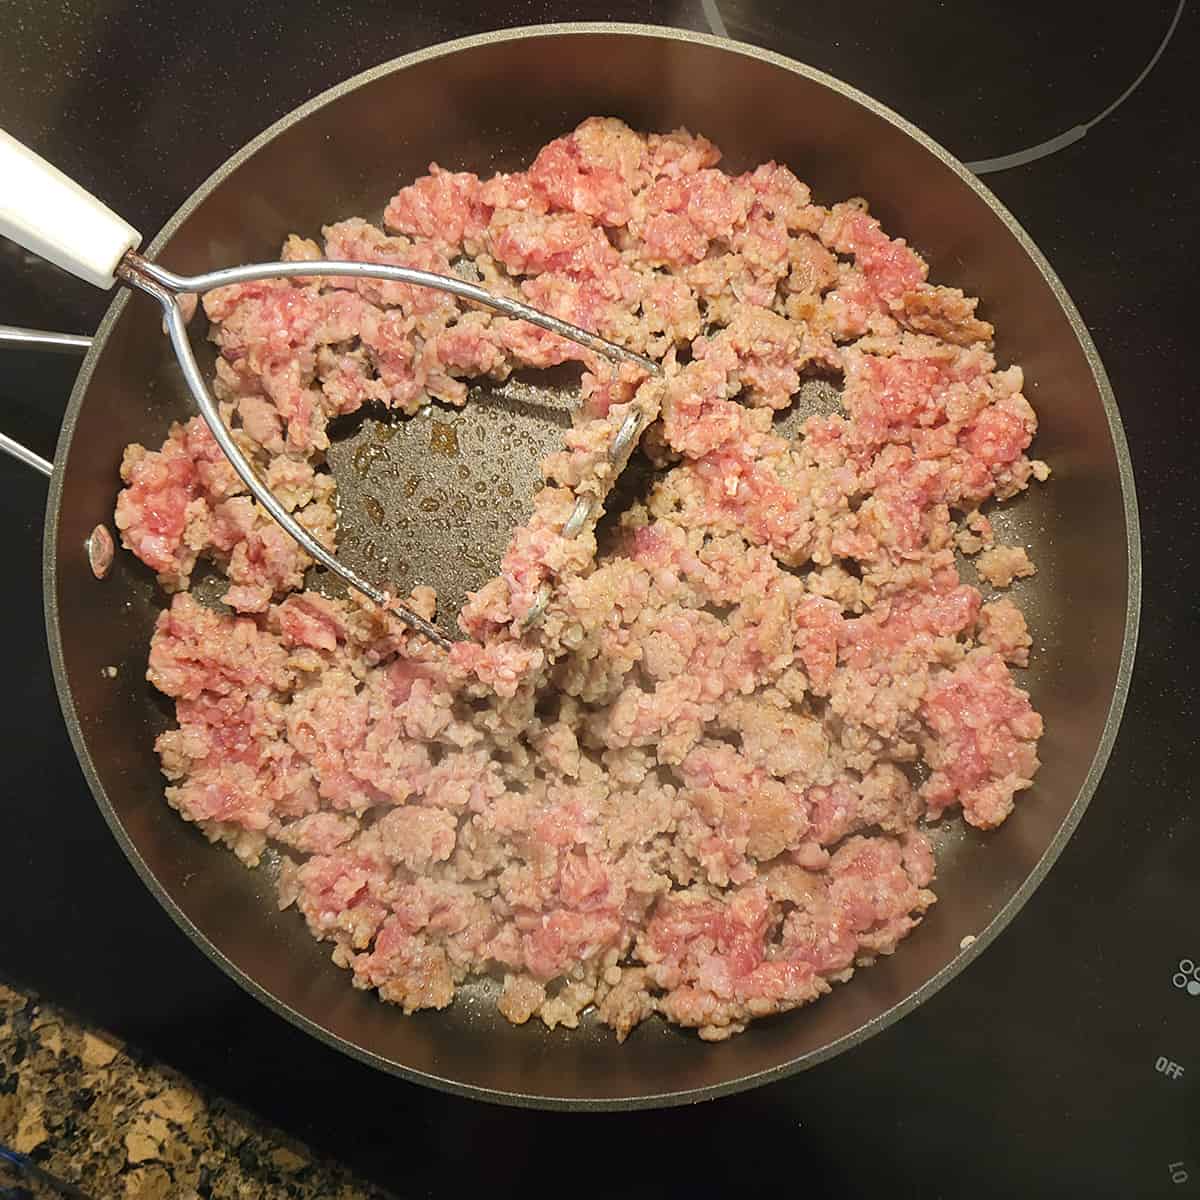 Sausage cooking in a skillet.